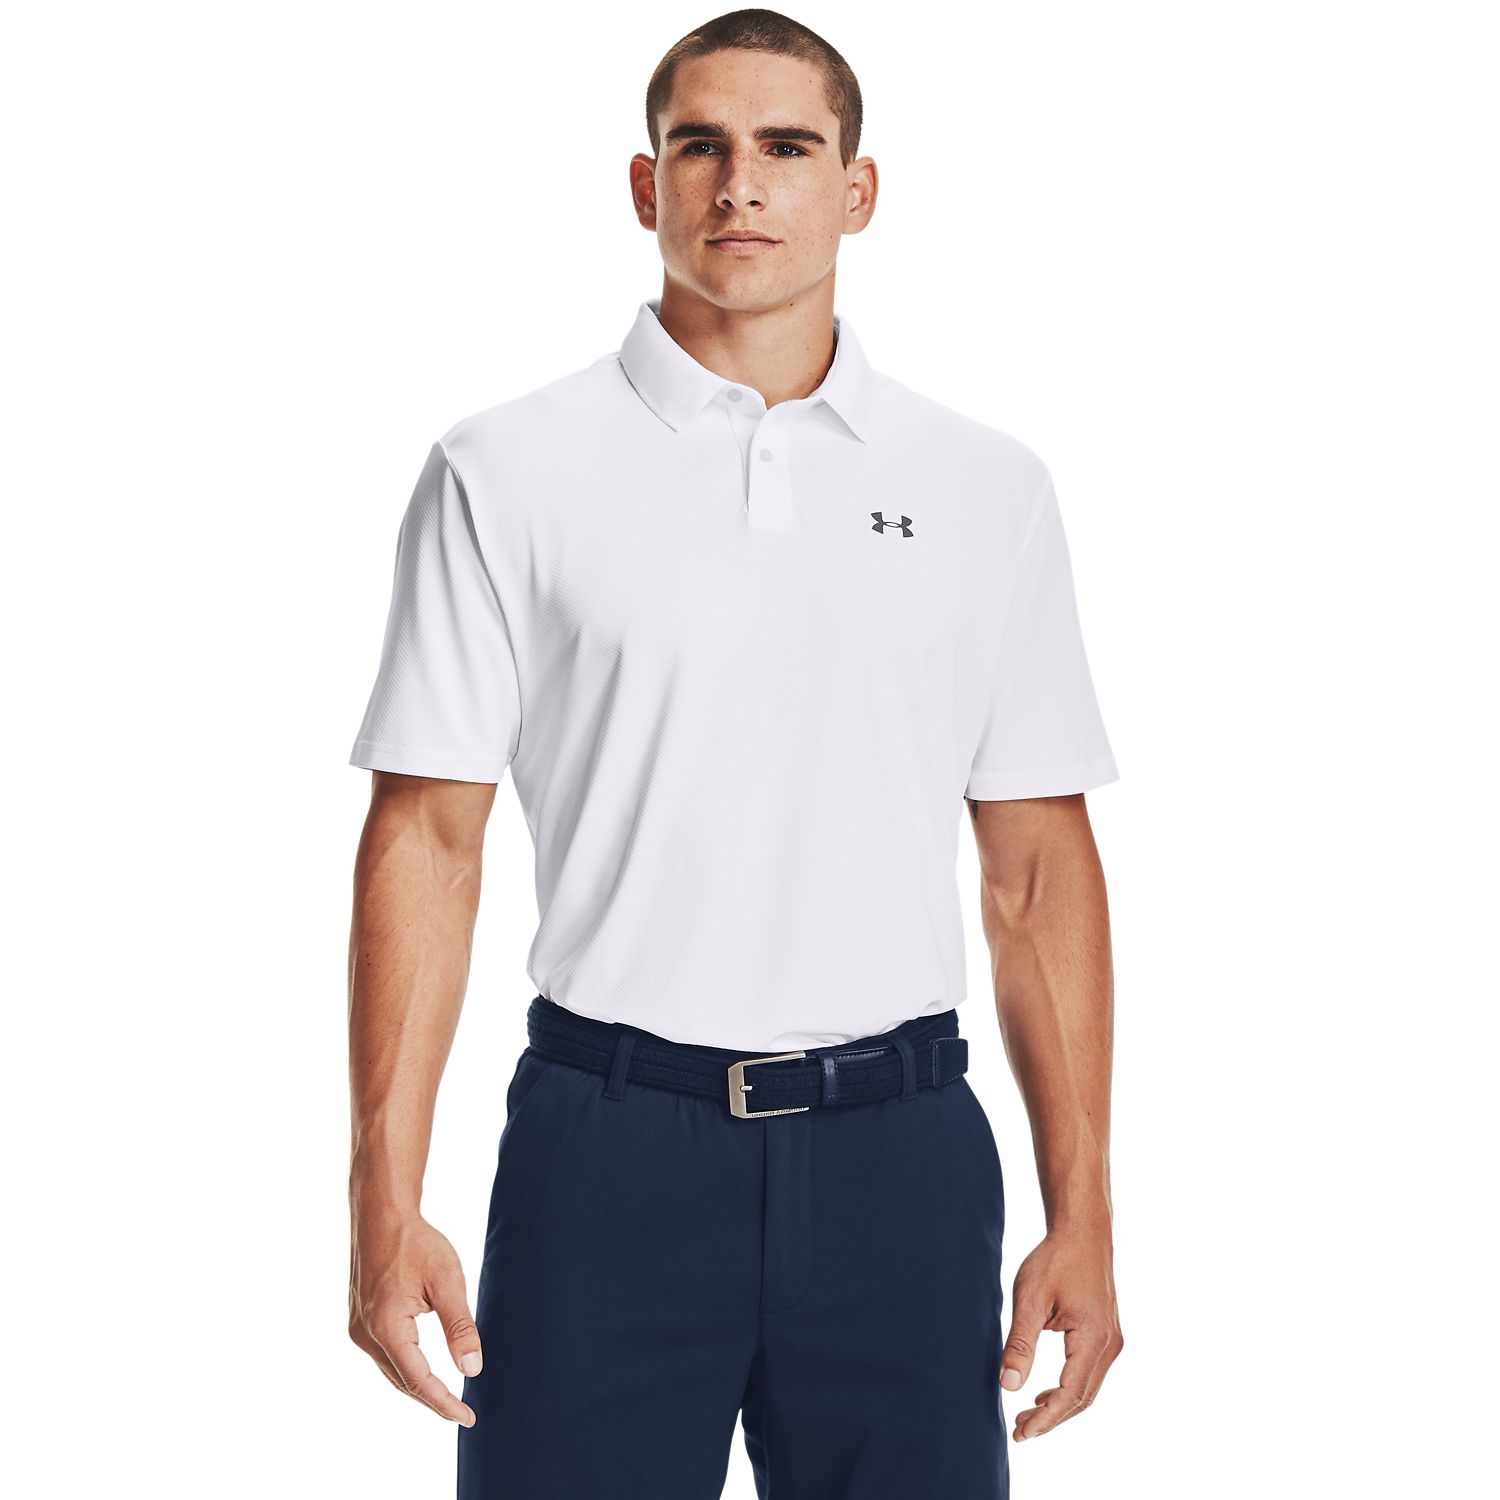 kohls mens under armour polo shirts be46cf